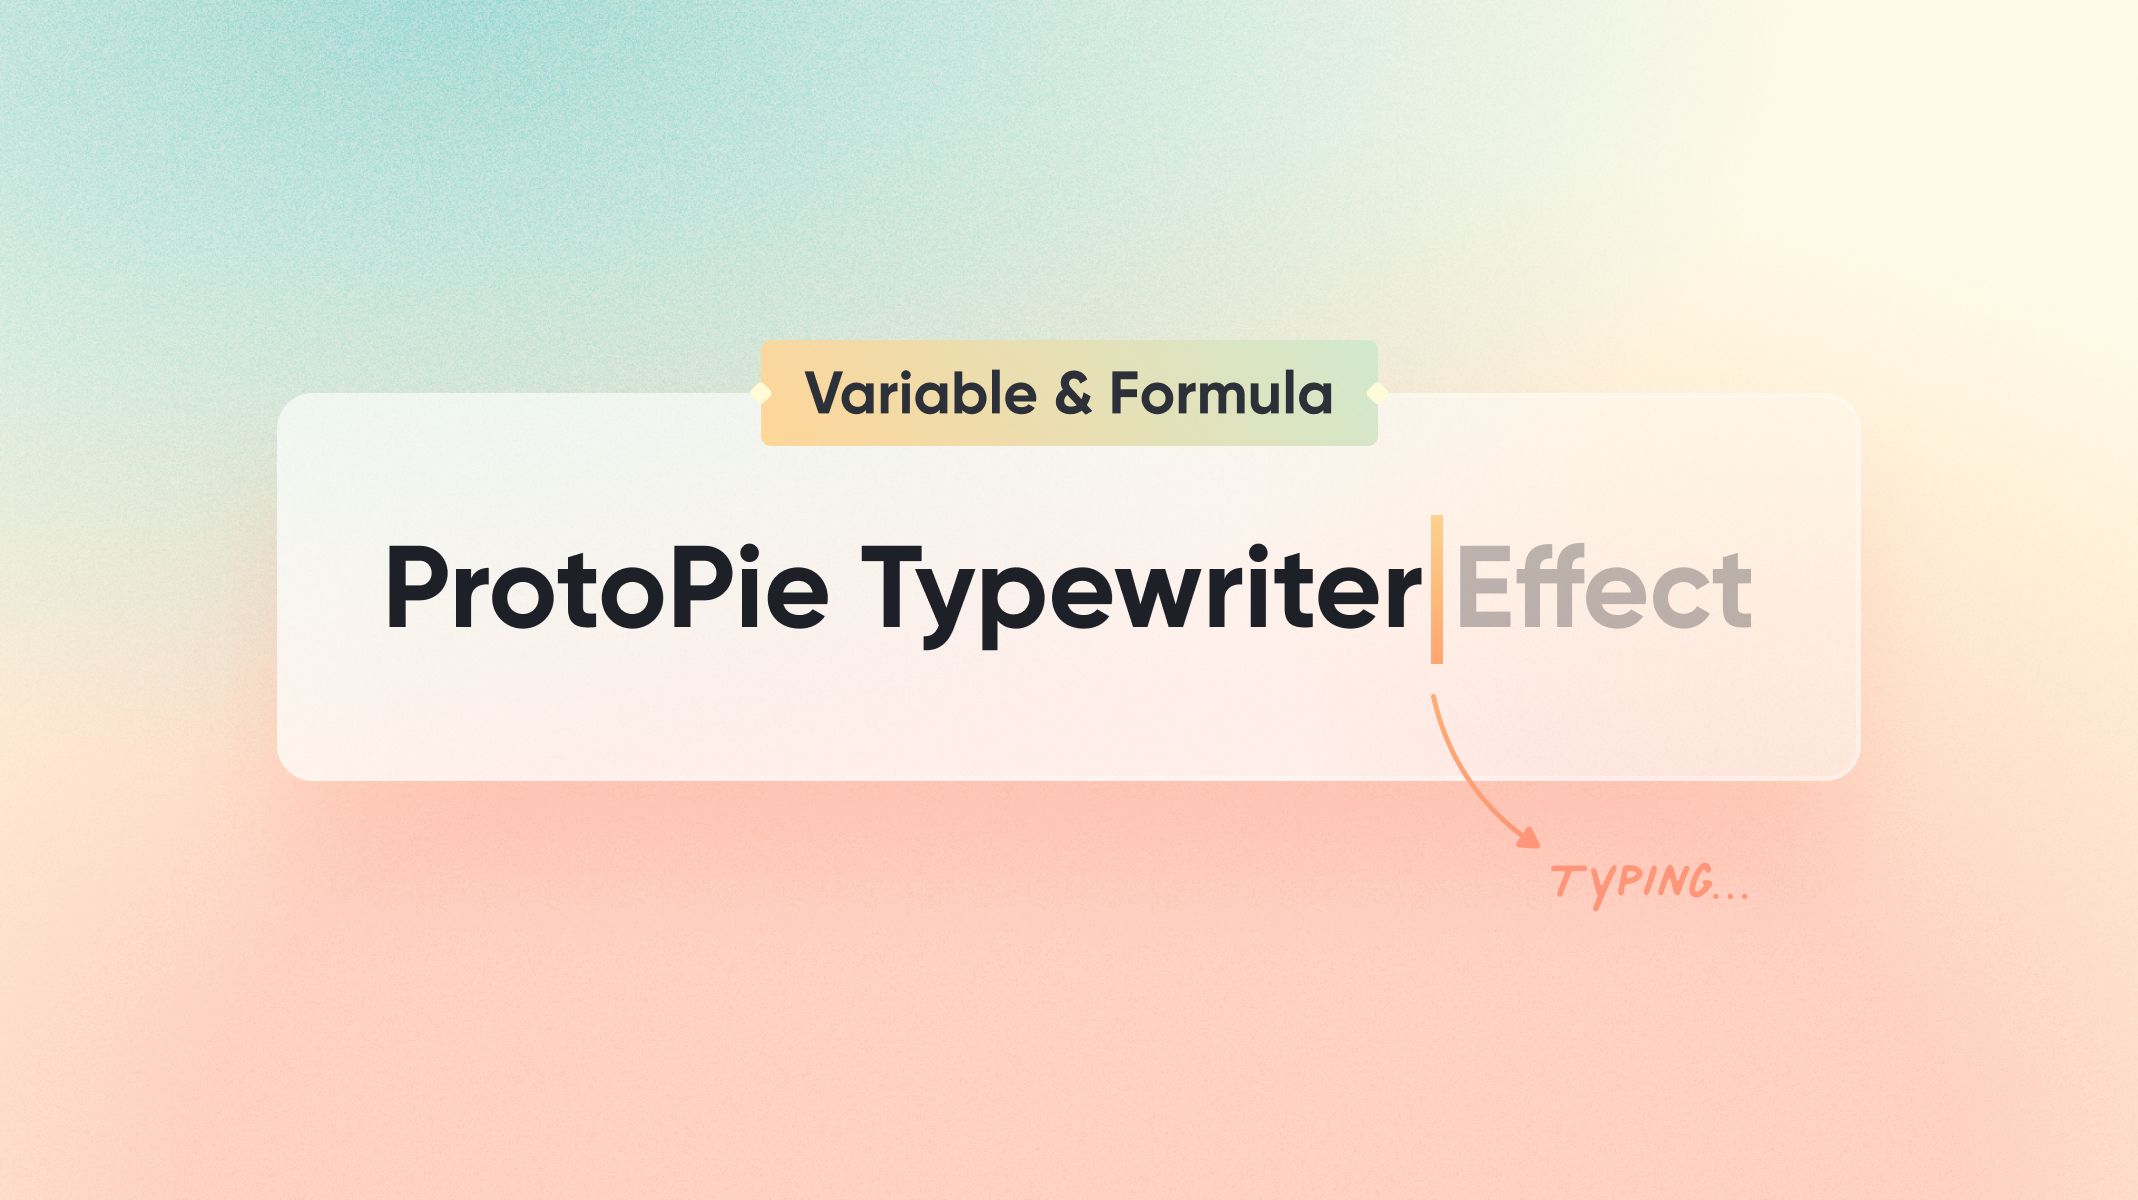 Create a Typewriter Effect Using Variables and Formulas